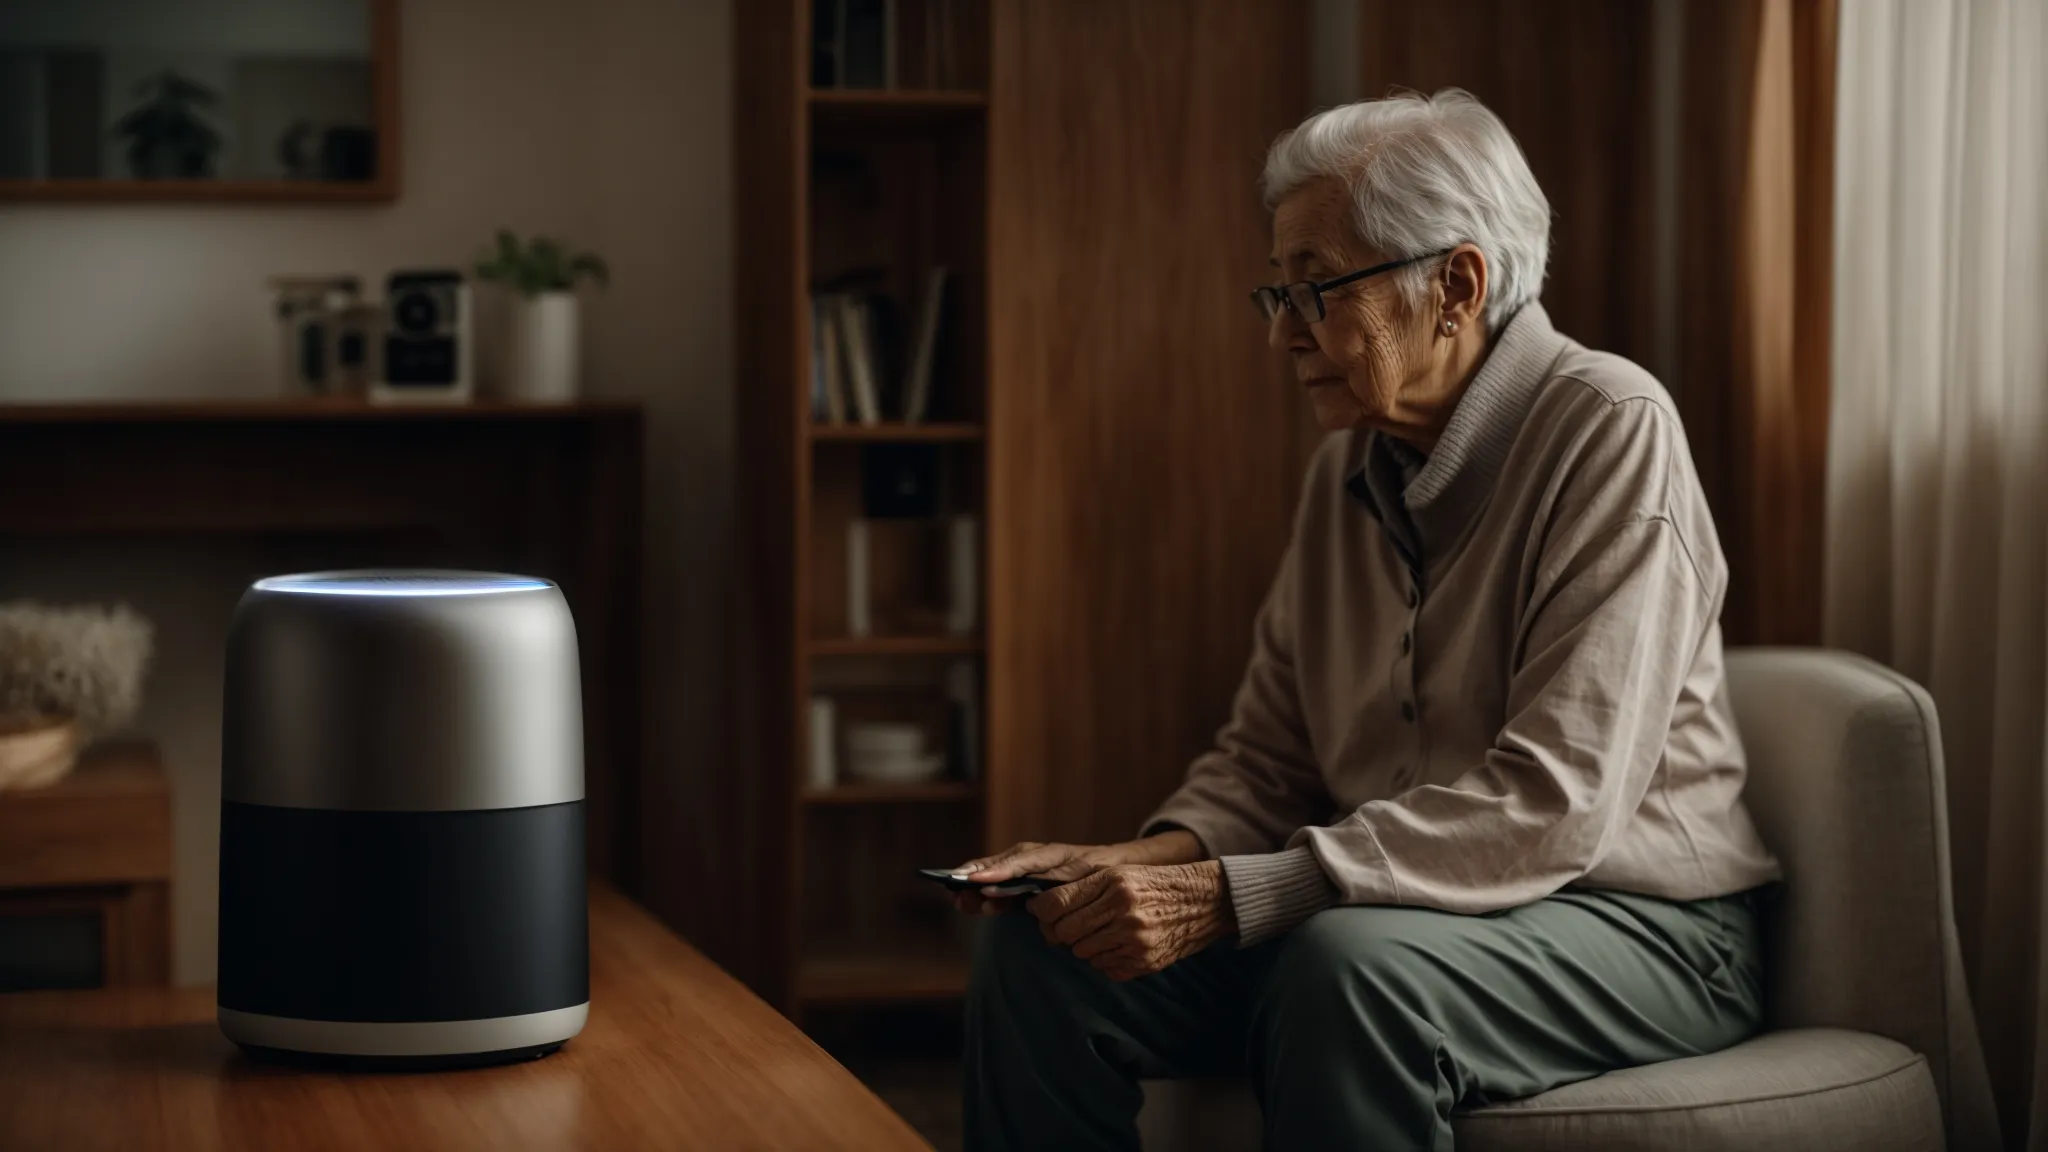 an elderly person speaking to a smart speaker in a cozy living room.